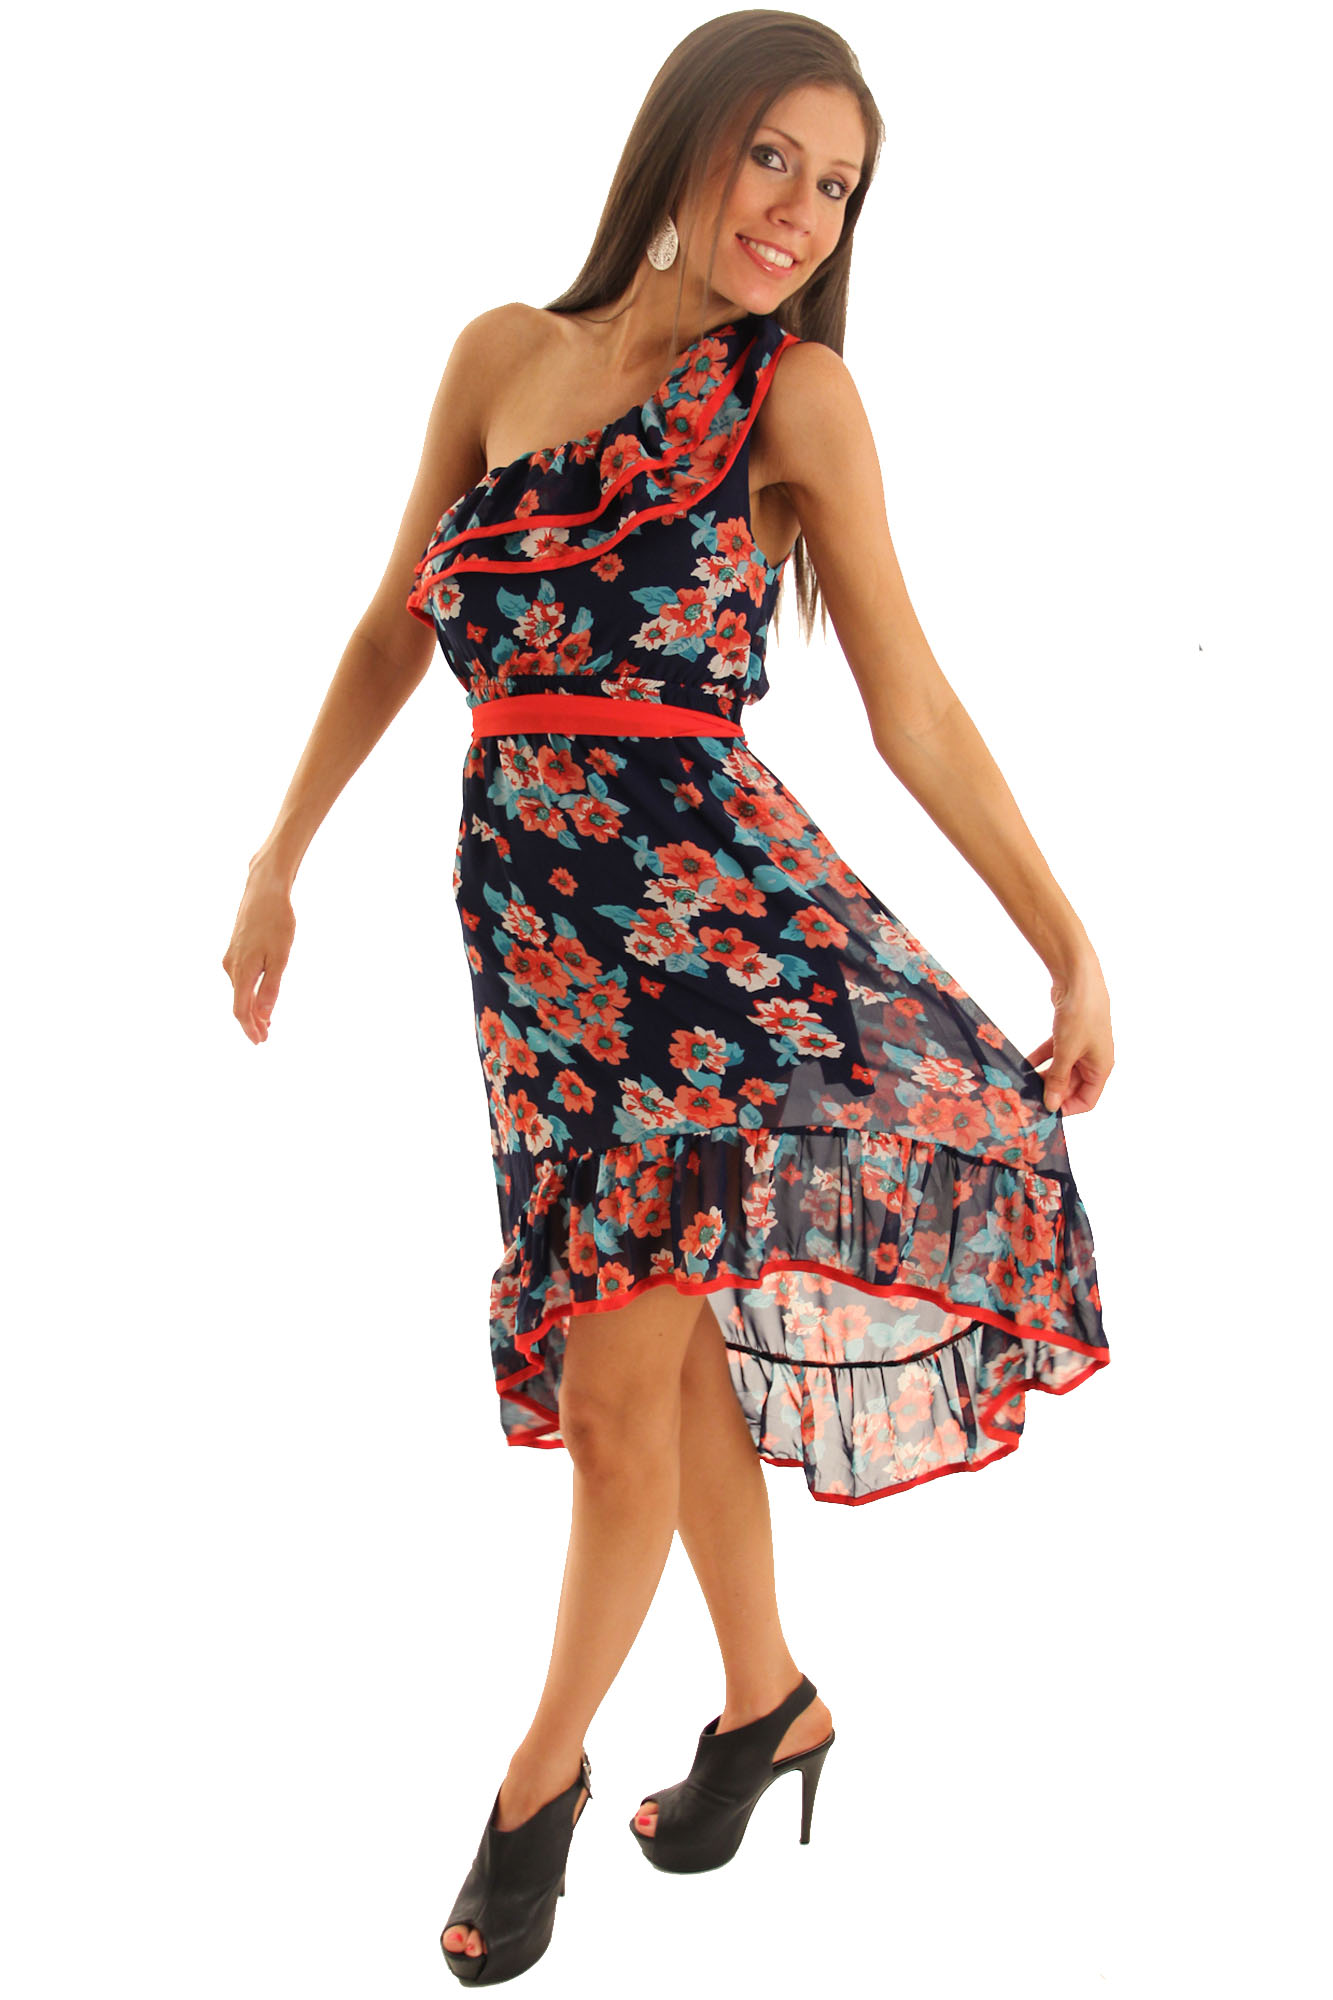 DHStyles.com DHStyles Women's Navy Red Flirty Ruffled One Shoulder Dress With Sash - Medium